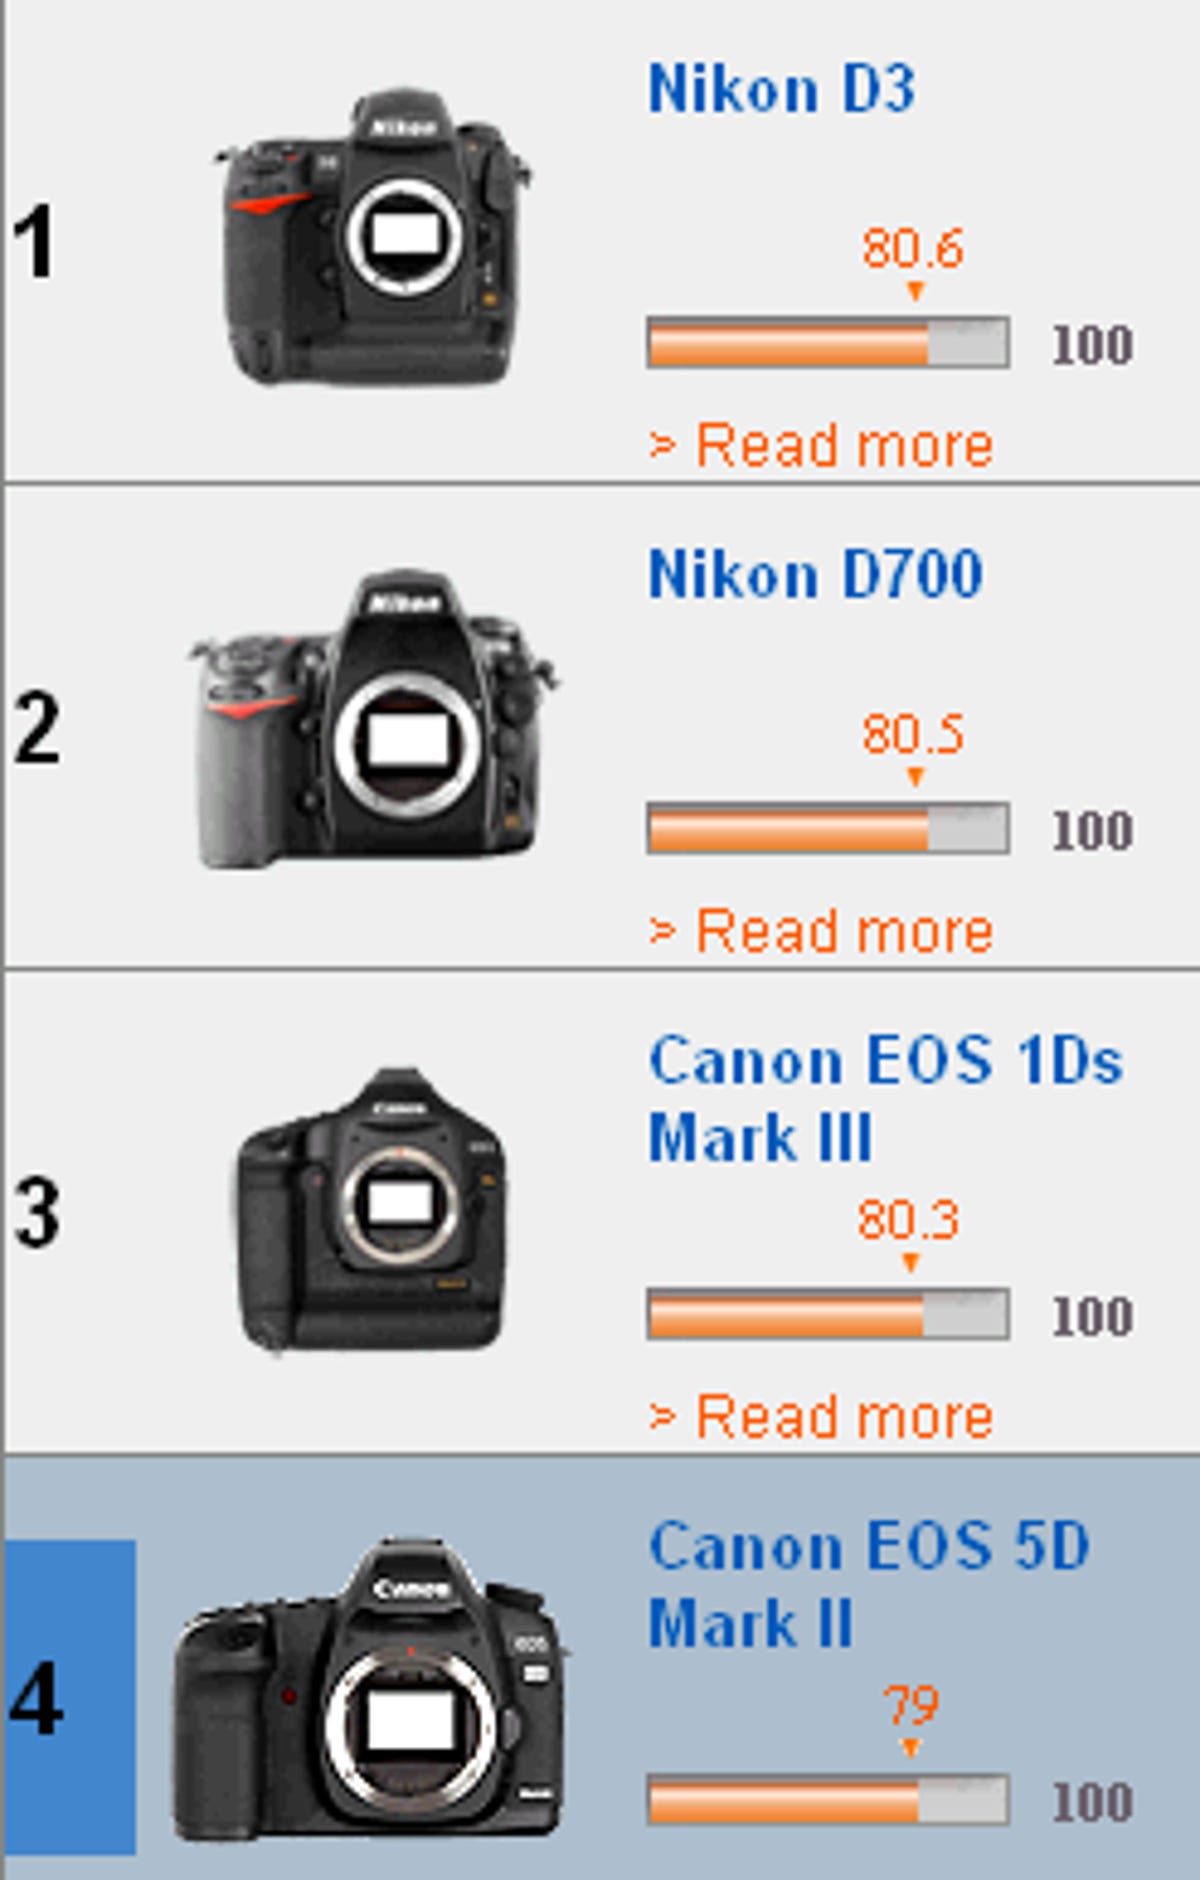 The Canon 5D Mark II is the new fourth-place member of DxO Labs' test of image sensor scores.